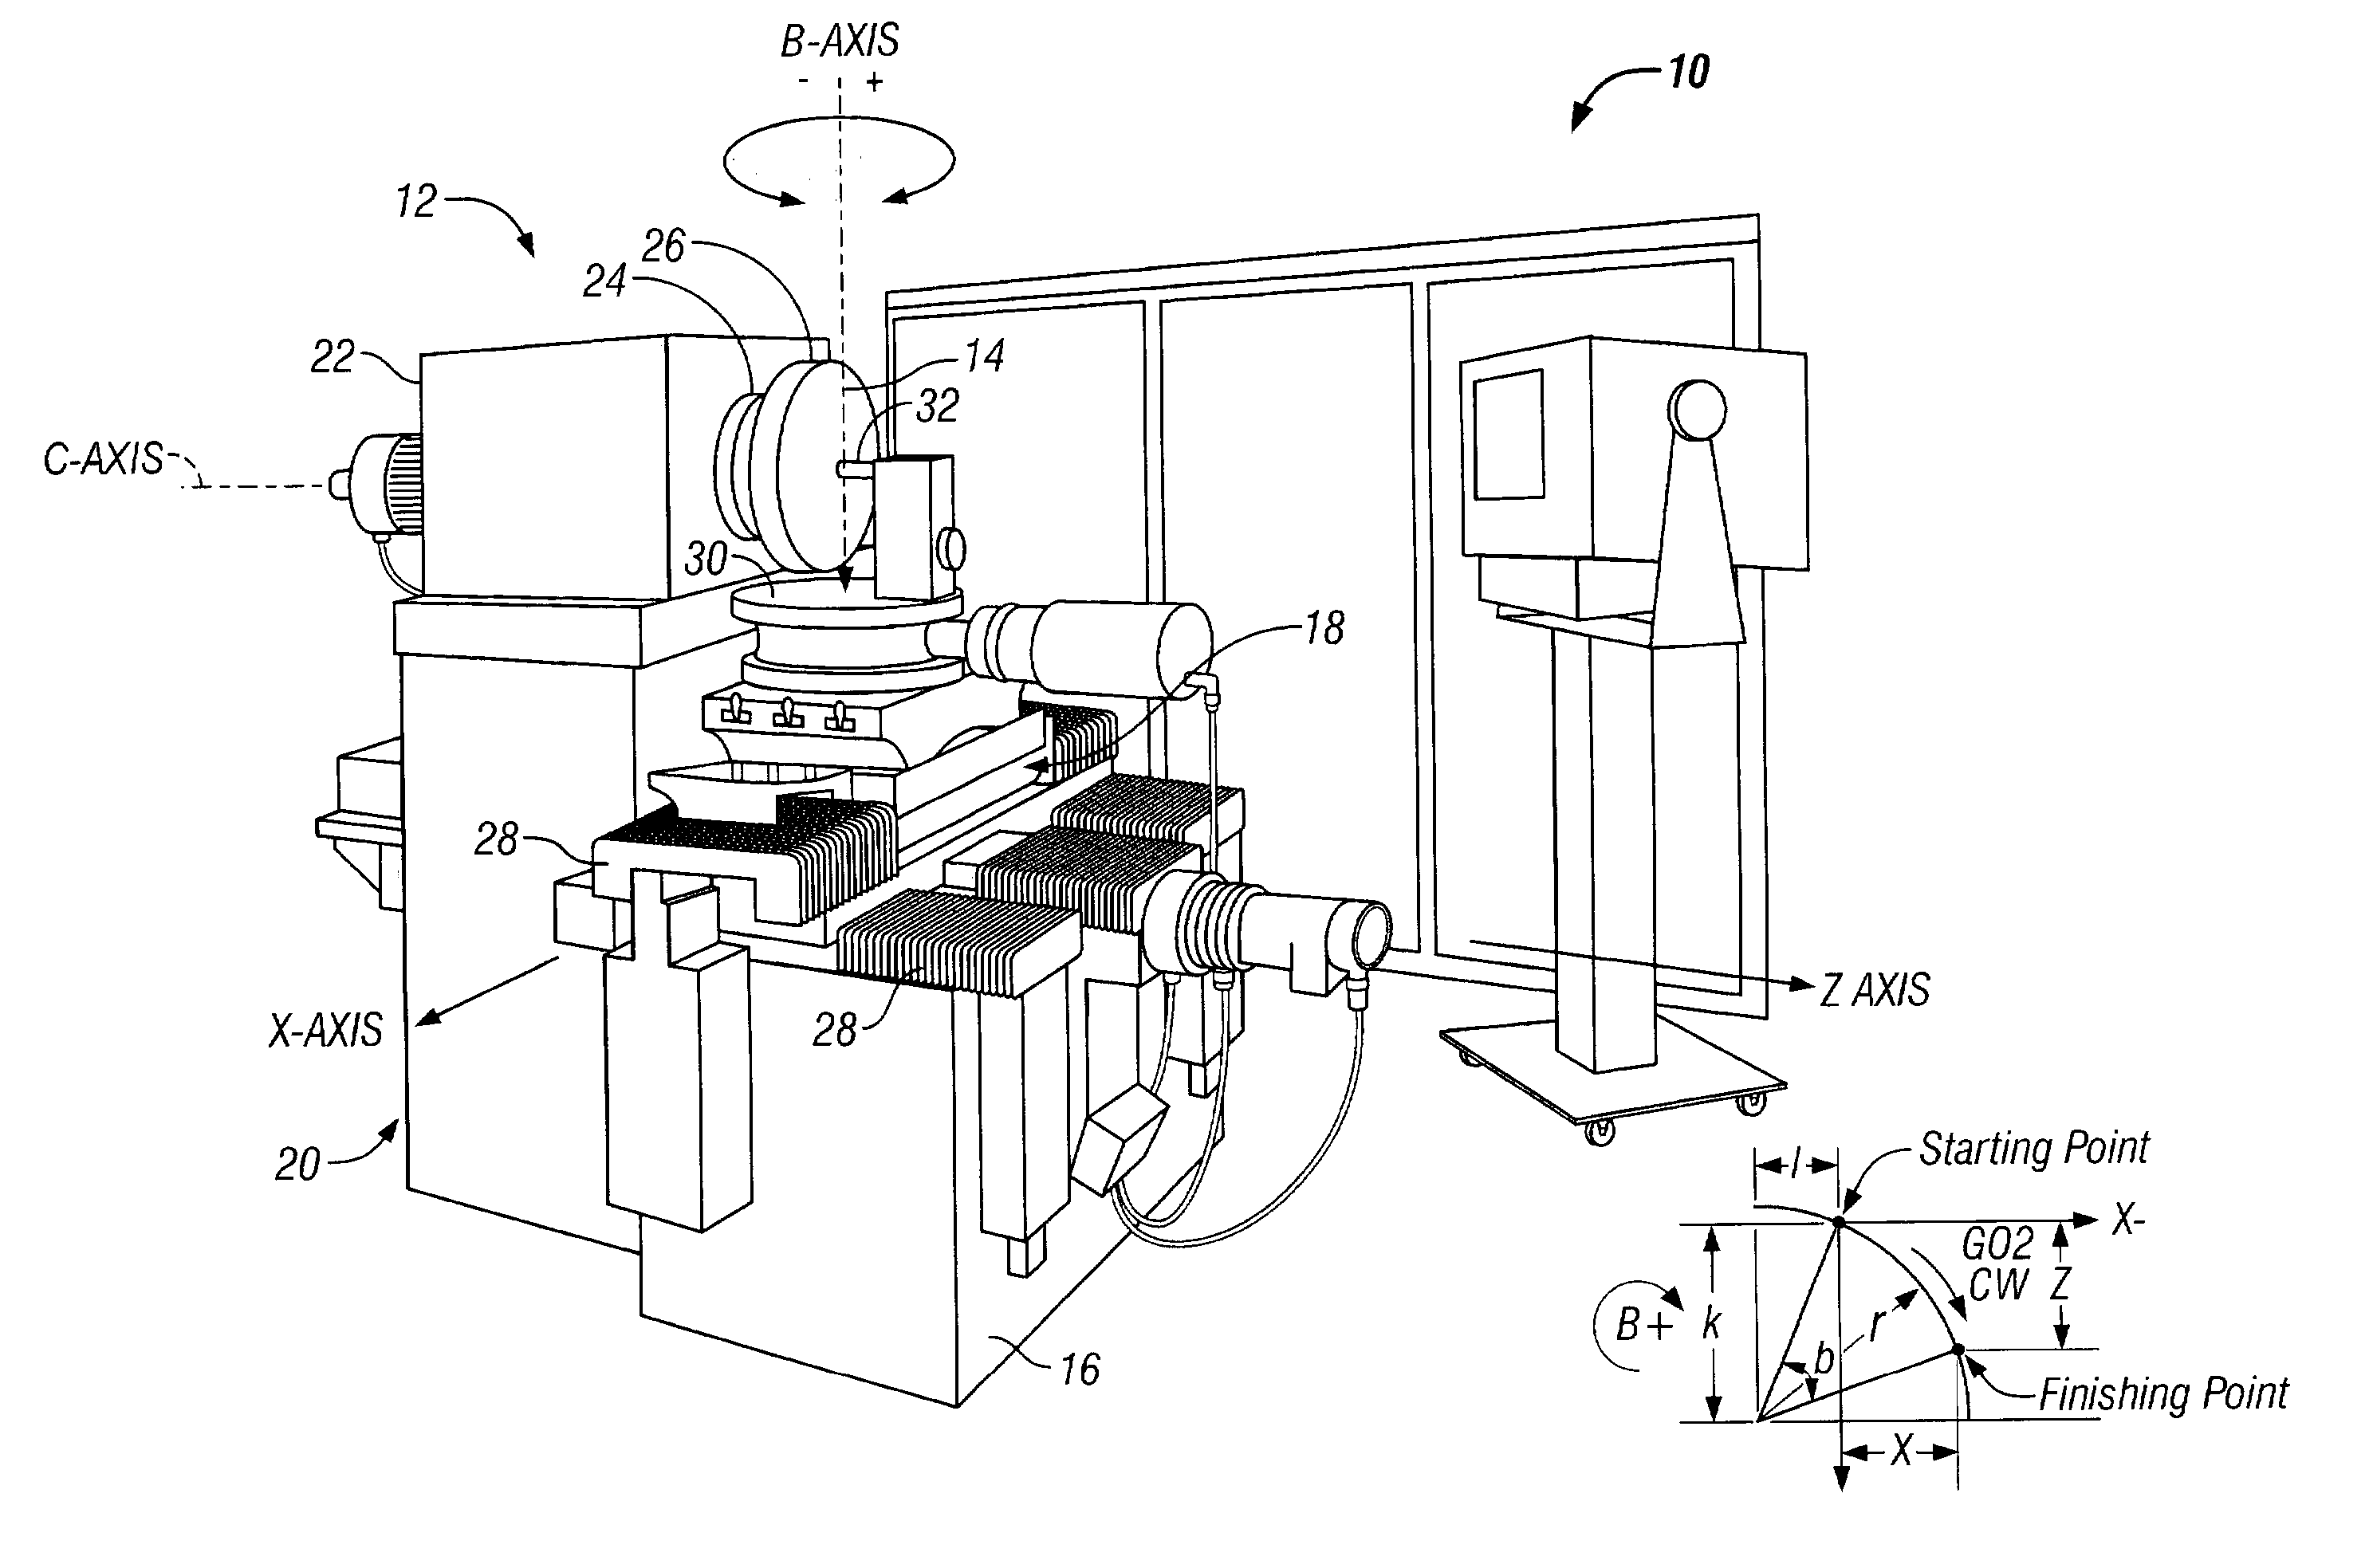 System and method for forming a non-rotationally symmetric portion of a workpiece